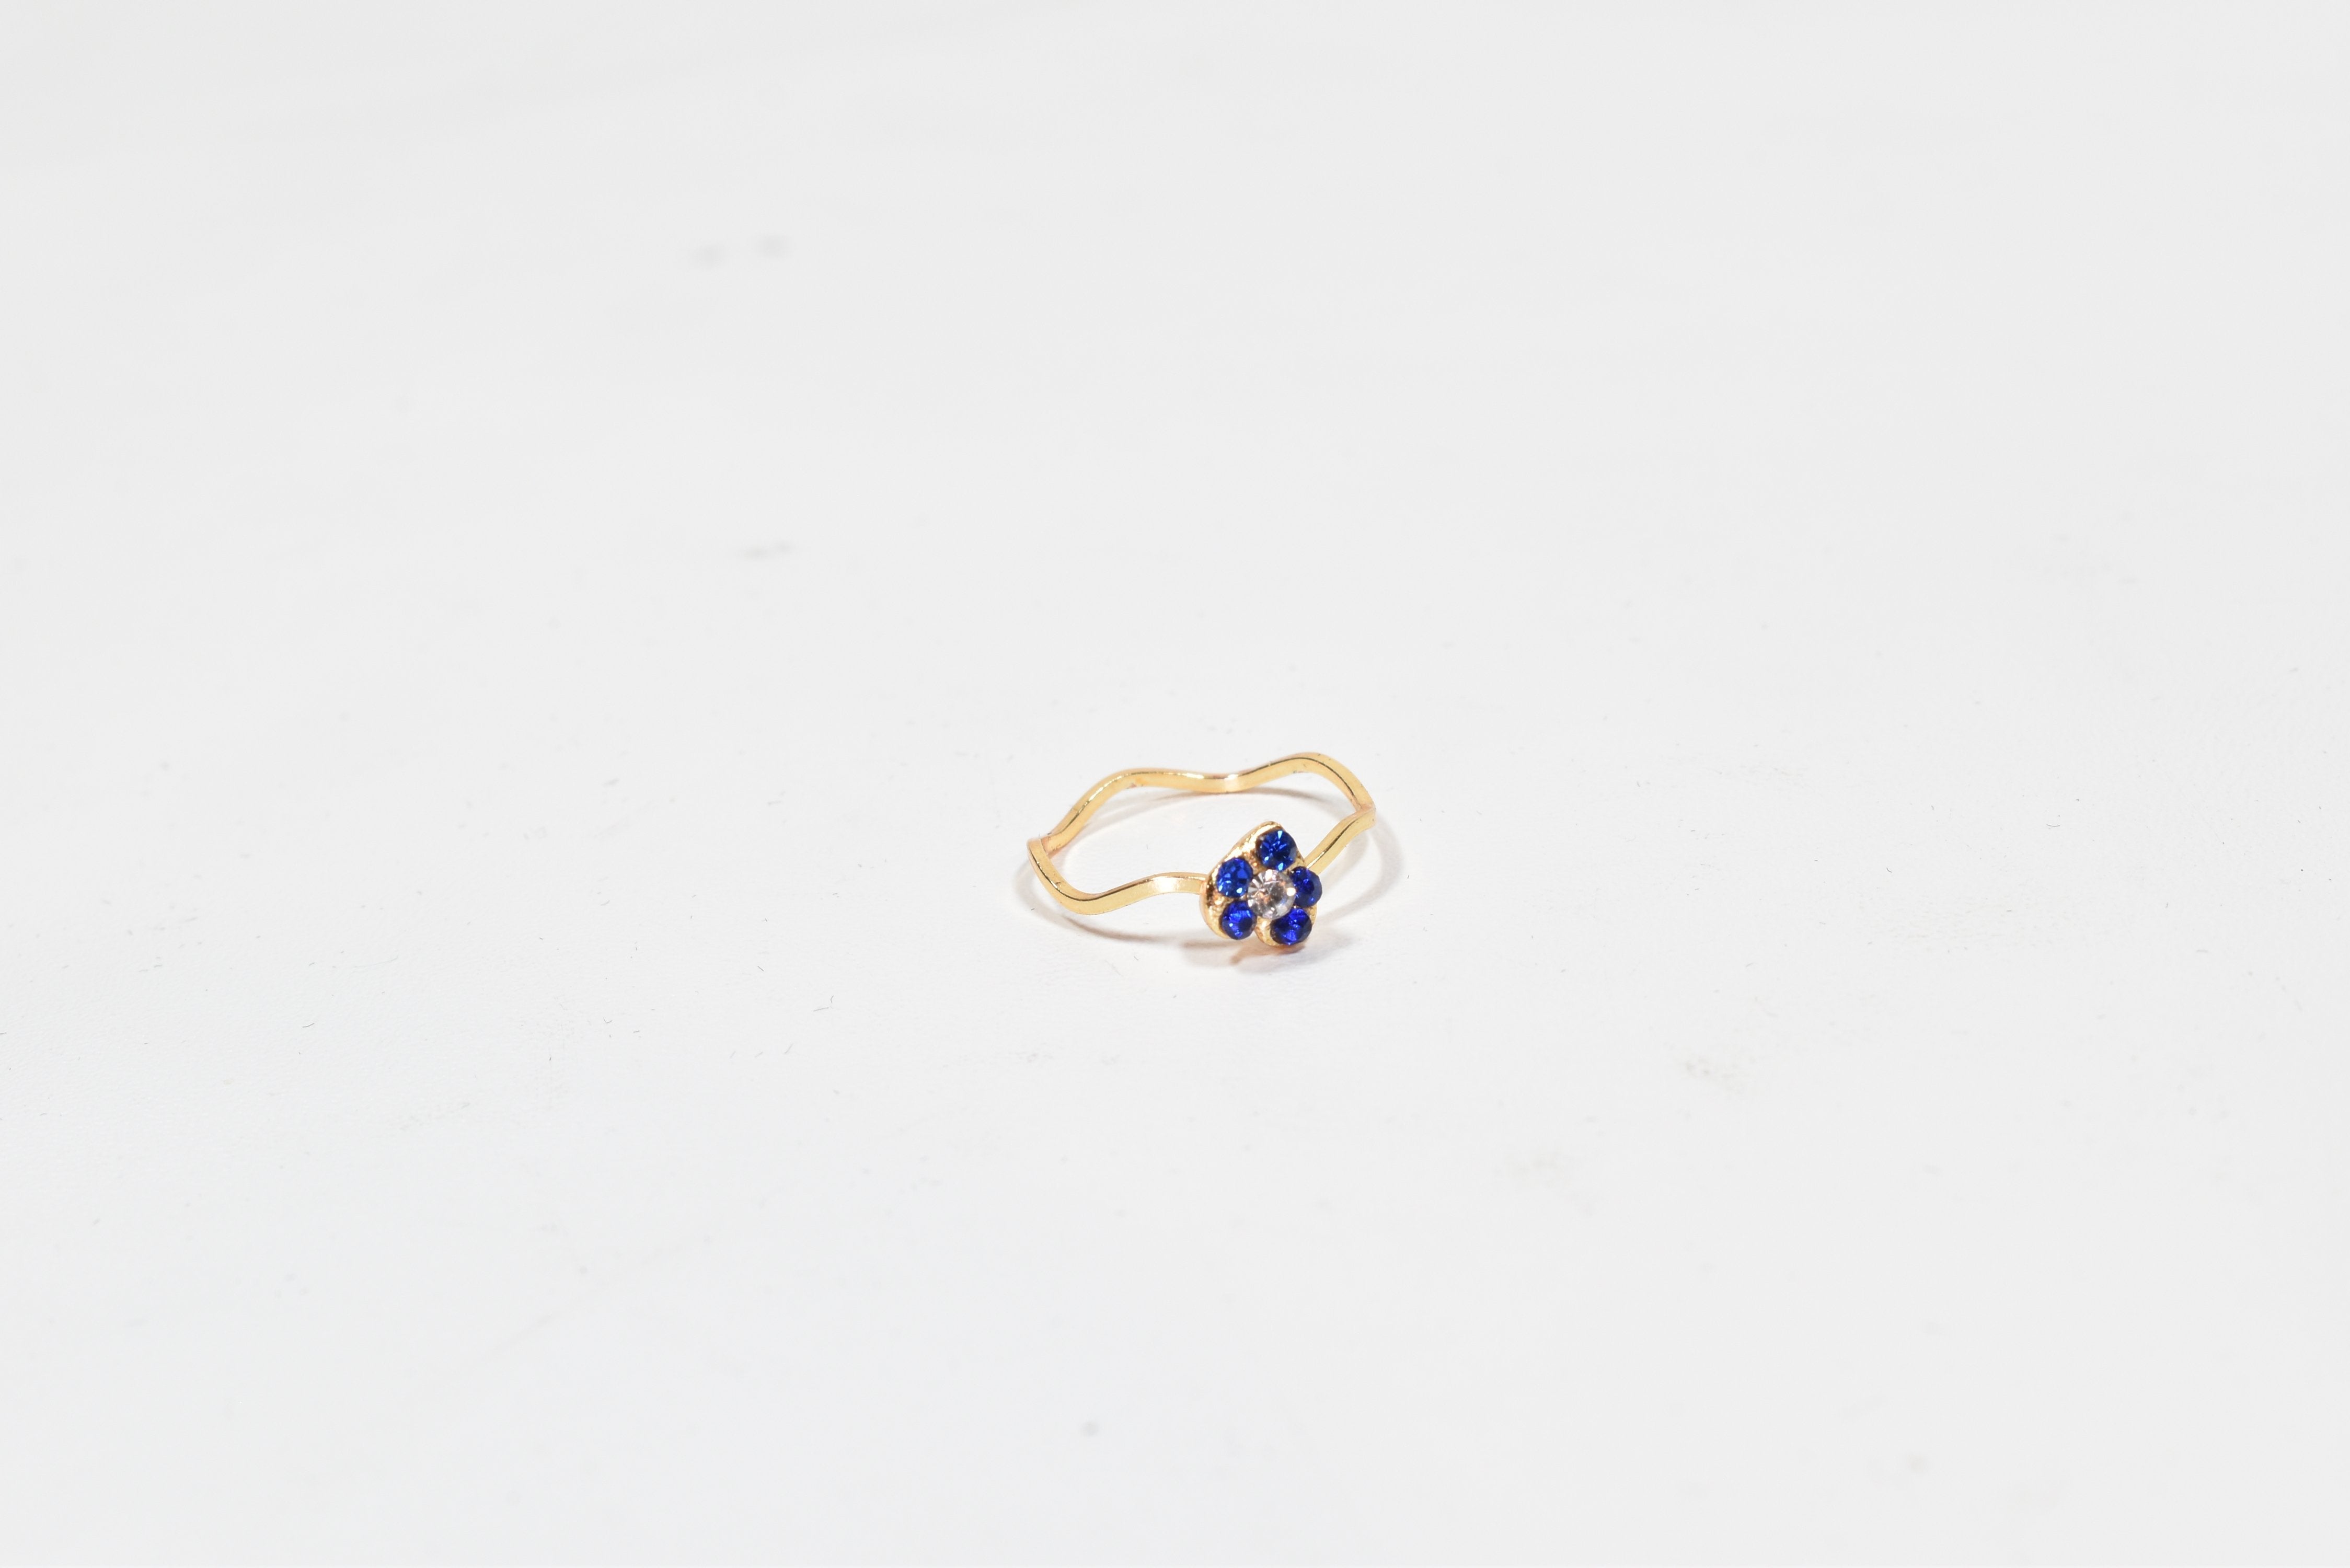 Sapphire Heart Ring gold band Crystal center piece size 5 used -00067